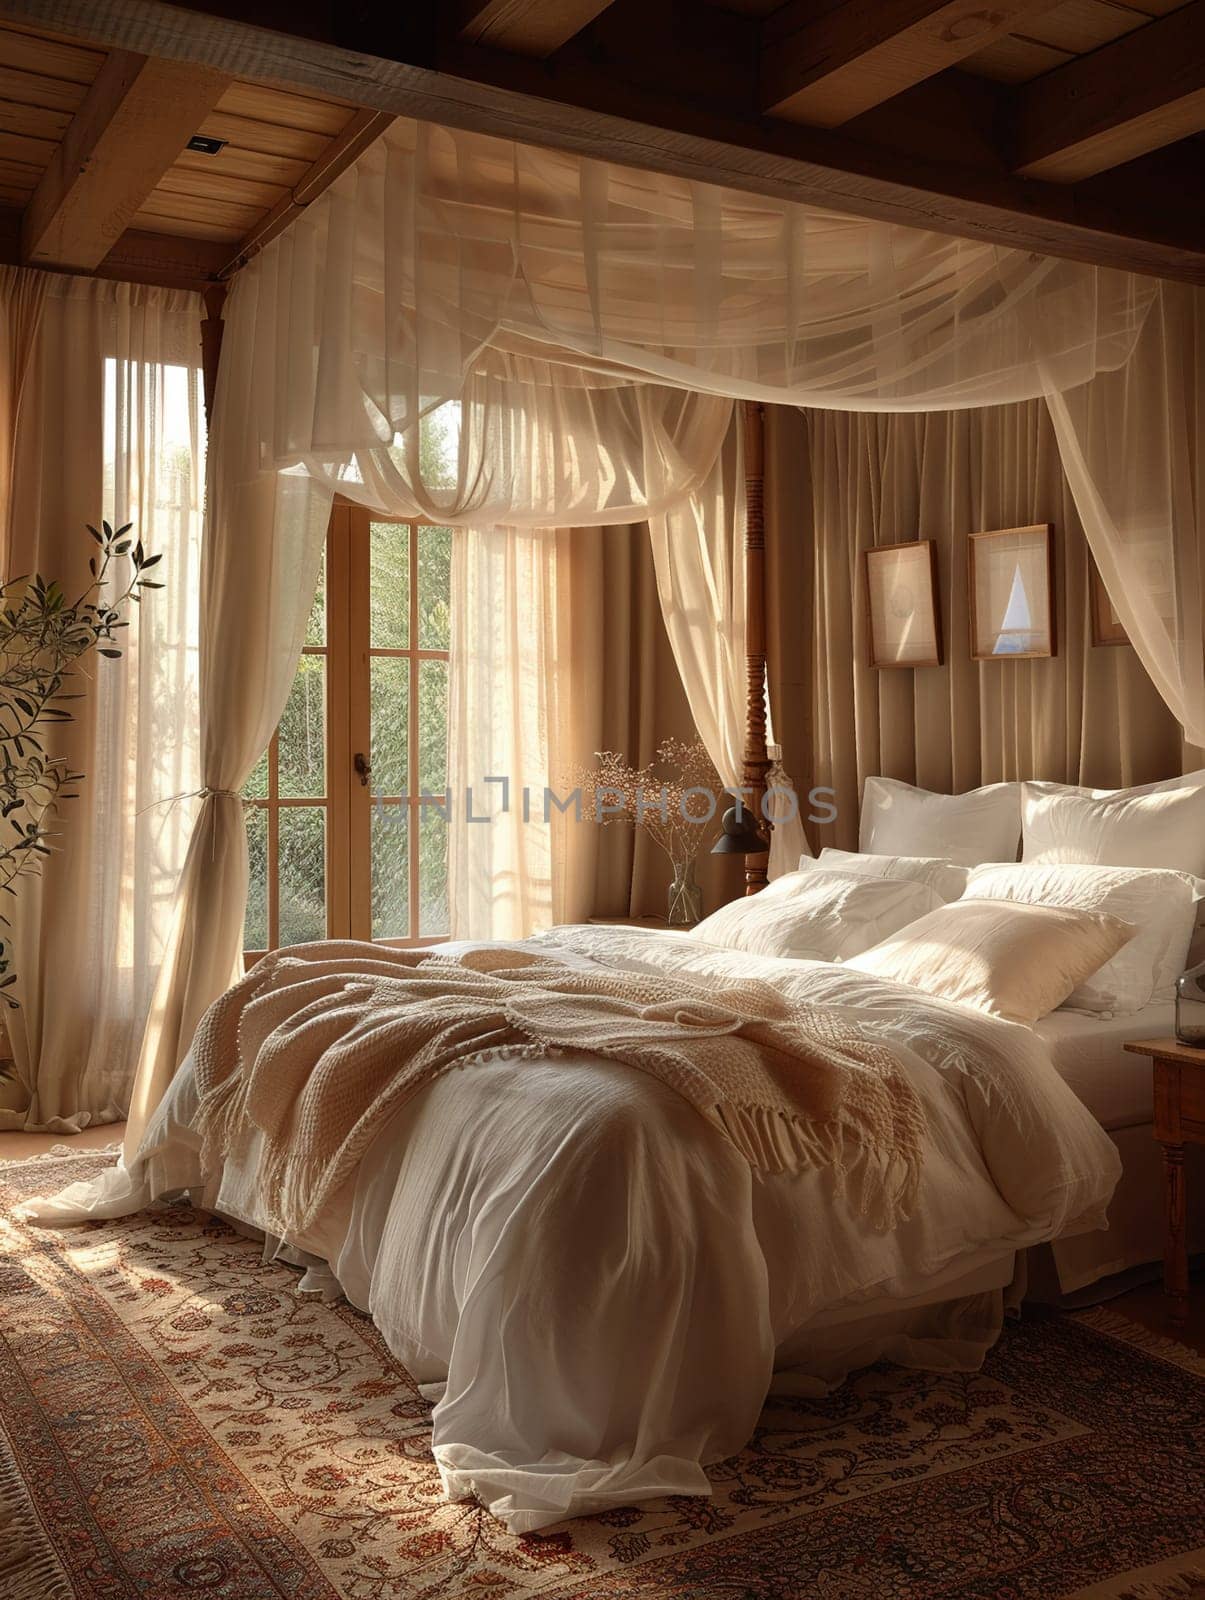 Romantic bedroom with soft lighting, sheer curtains, and a four-poster bed